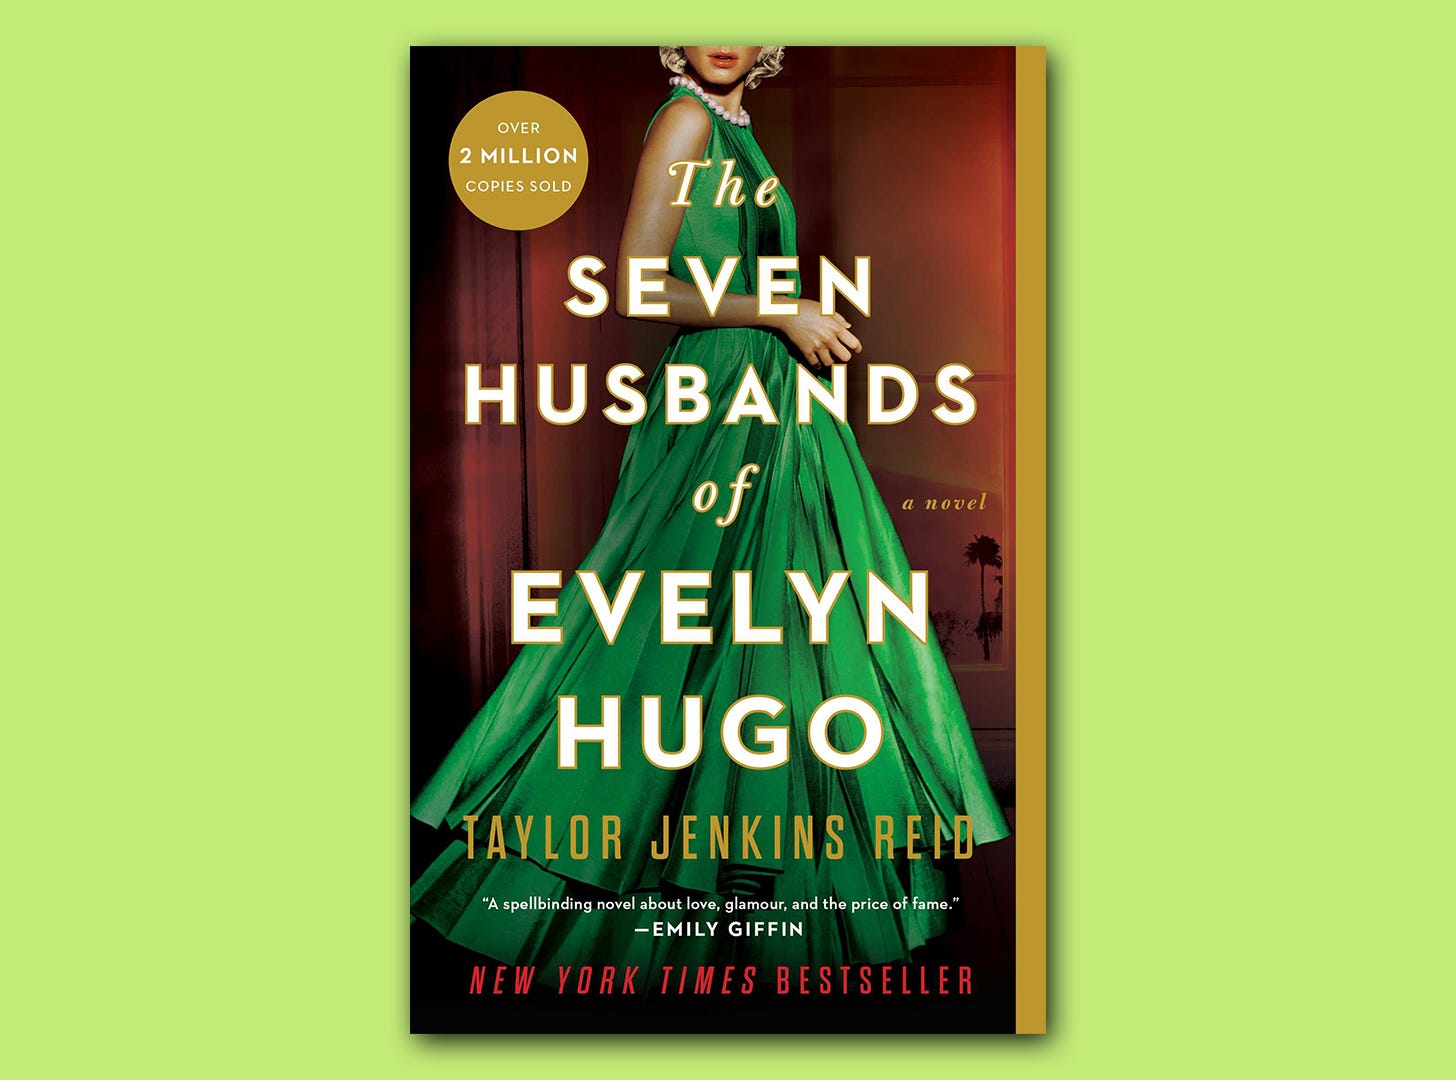 The front cover of the book "The Seven Husbands of Evelyn Hugo" by Taylor Jenkins Reid is superimposed on a light green block colour background. The book cover shows a glamorous woman in a shiny green ballgown with a pearl necklace.